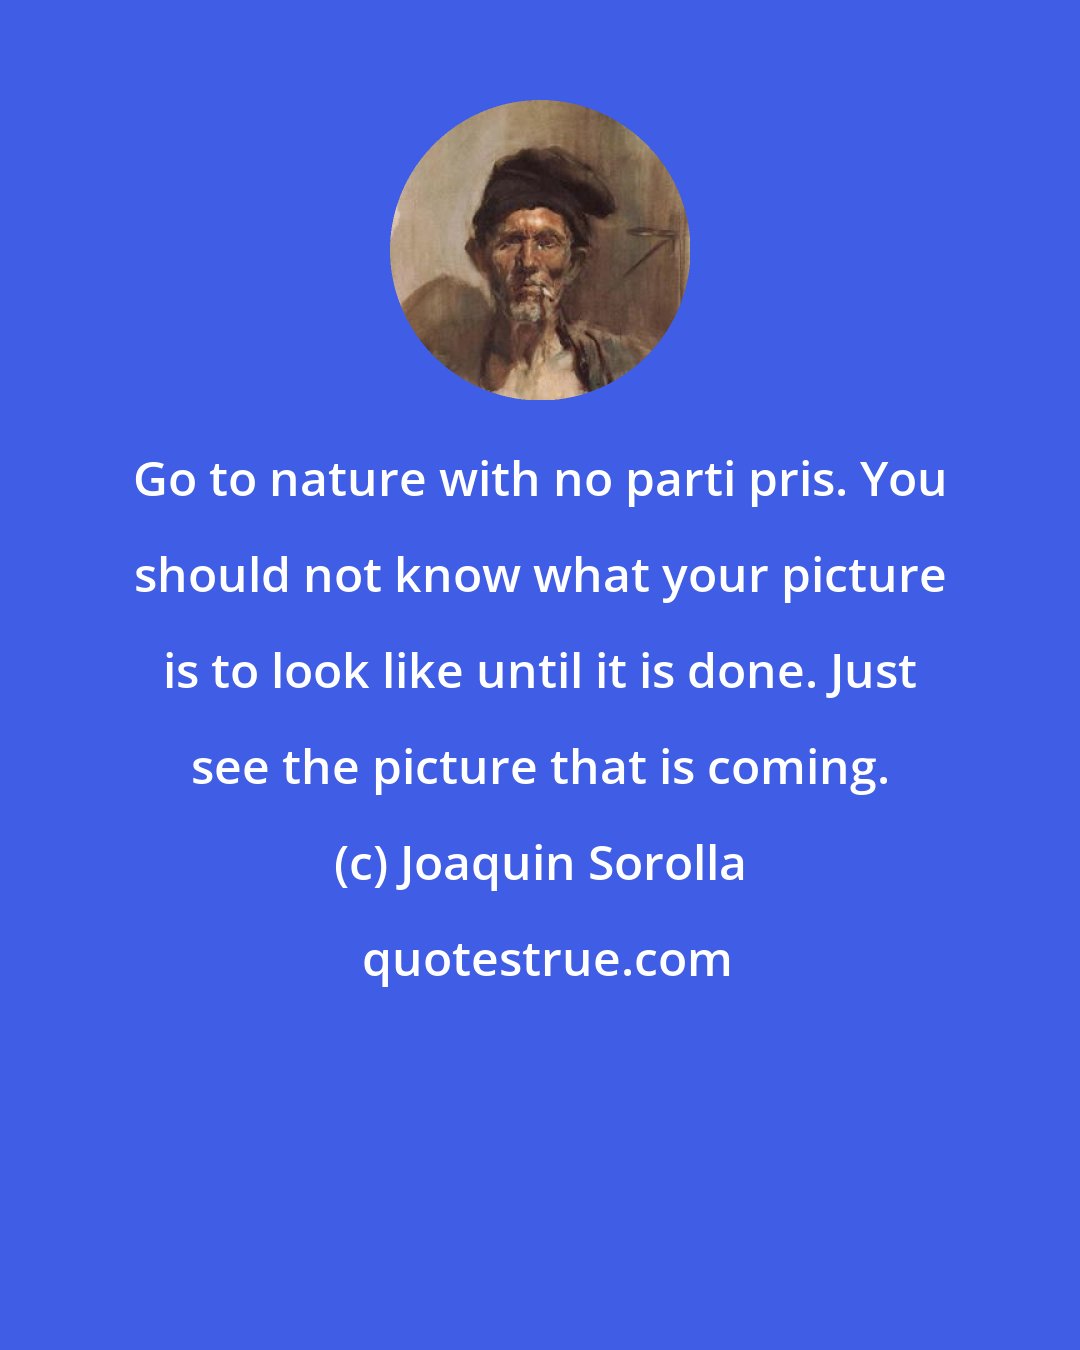 Joaquin Sorolla: Go to nature with no parti pris. You should not know what your picture is to look like until it is done. Just see the picture that is coming.